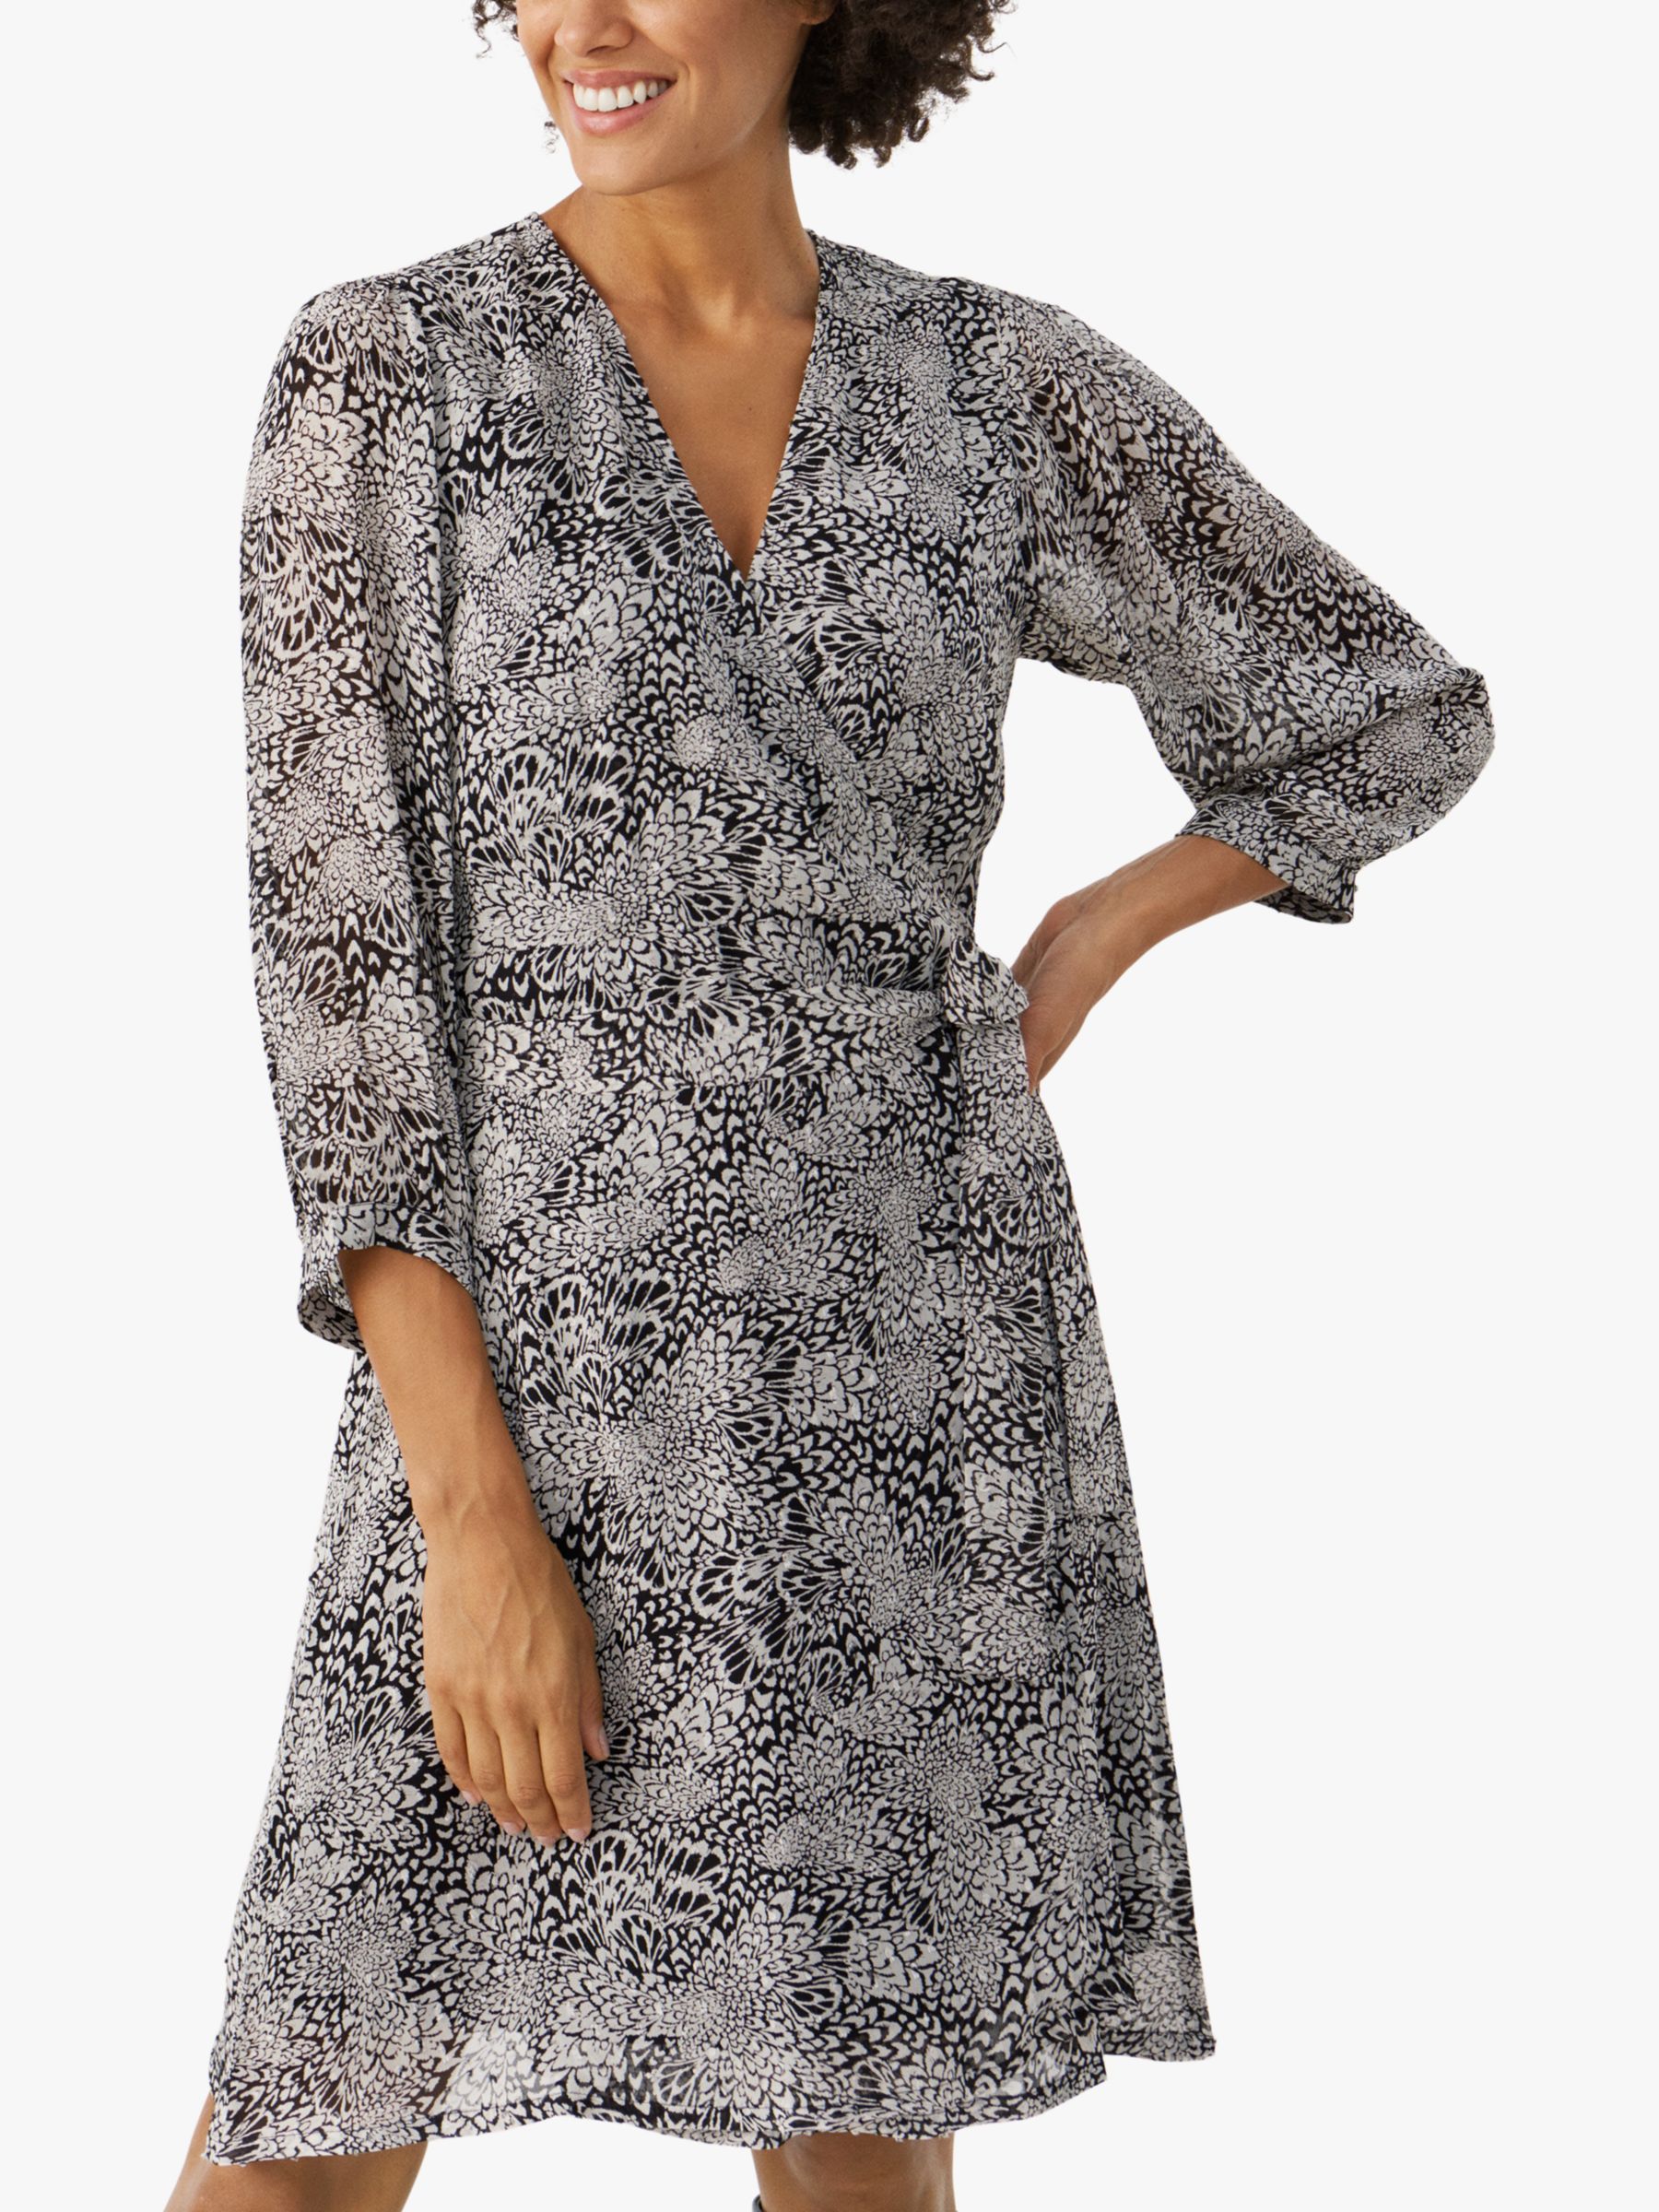 Buy Part Two Trine Relaxed Fit 3/4 Sleeve Mini Dress, Black Online at johnlewis.com